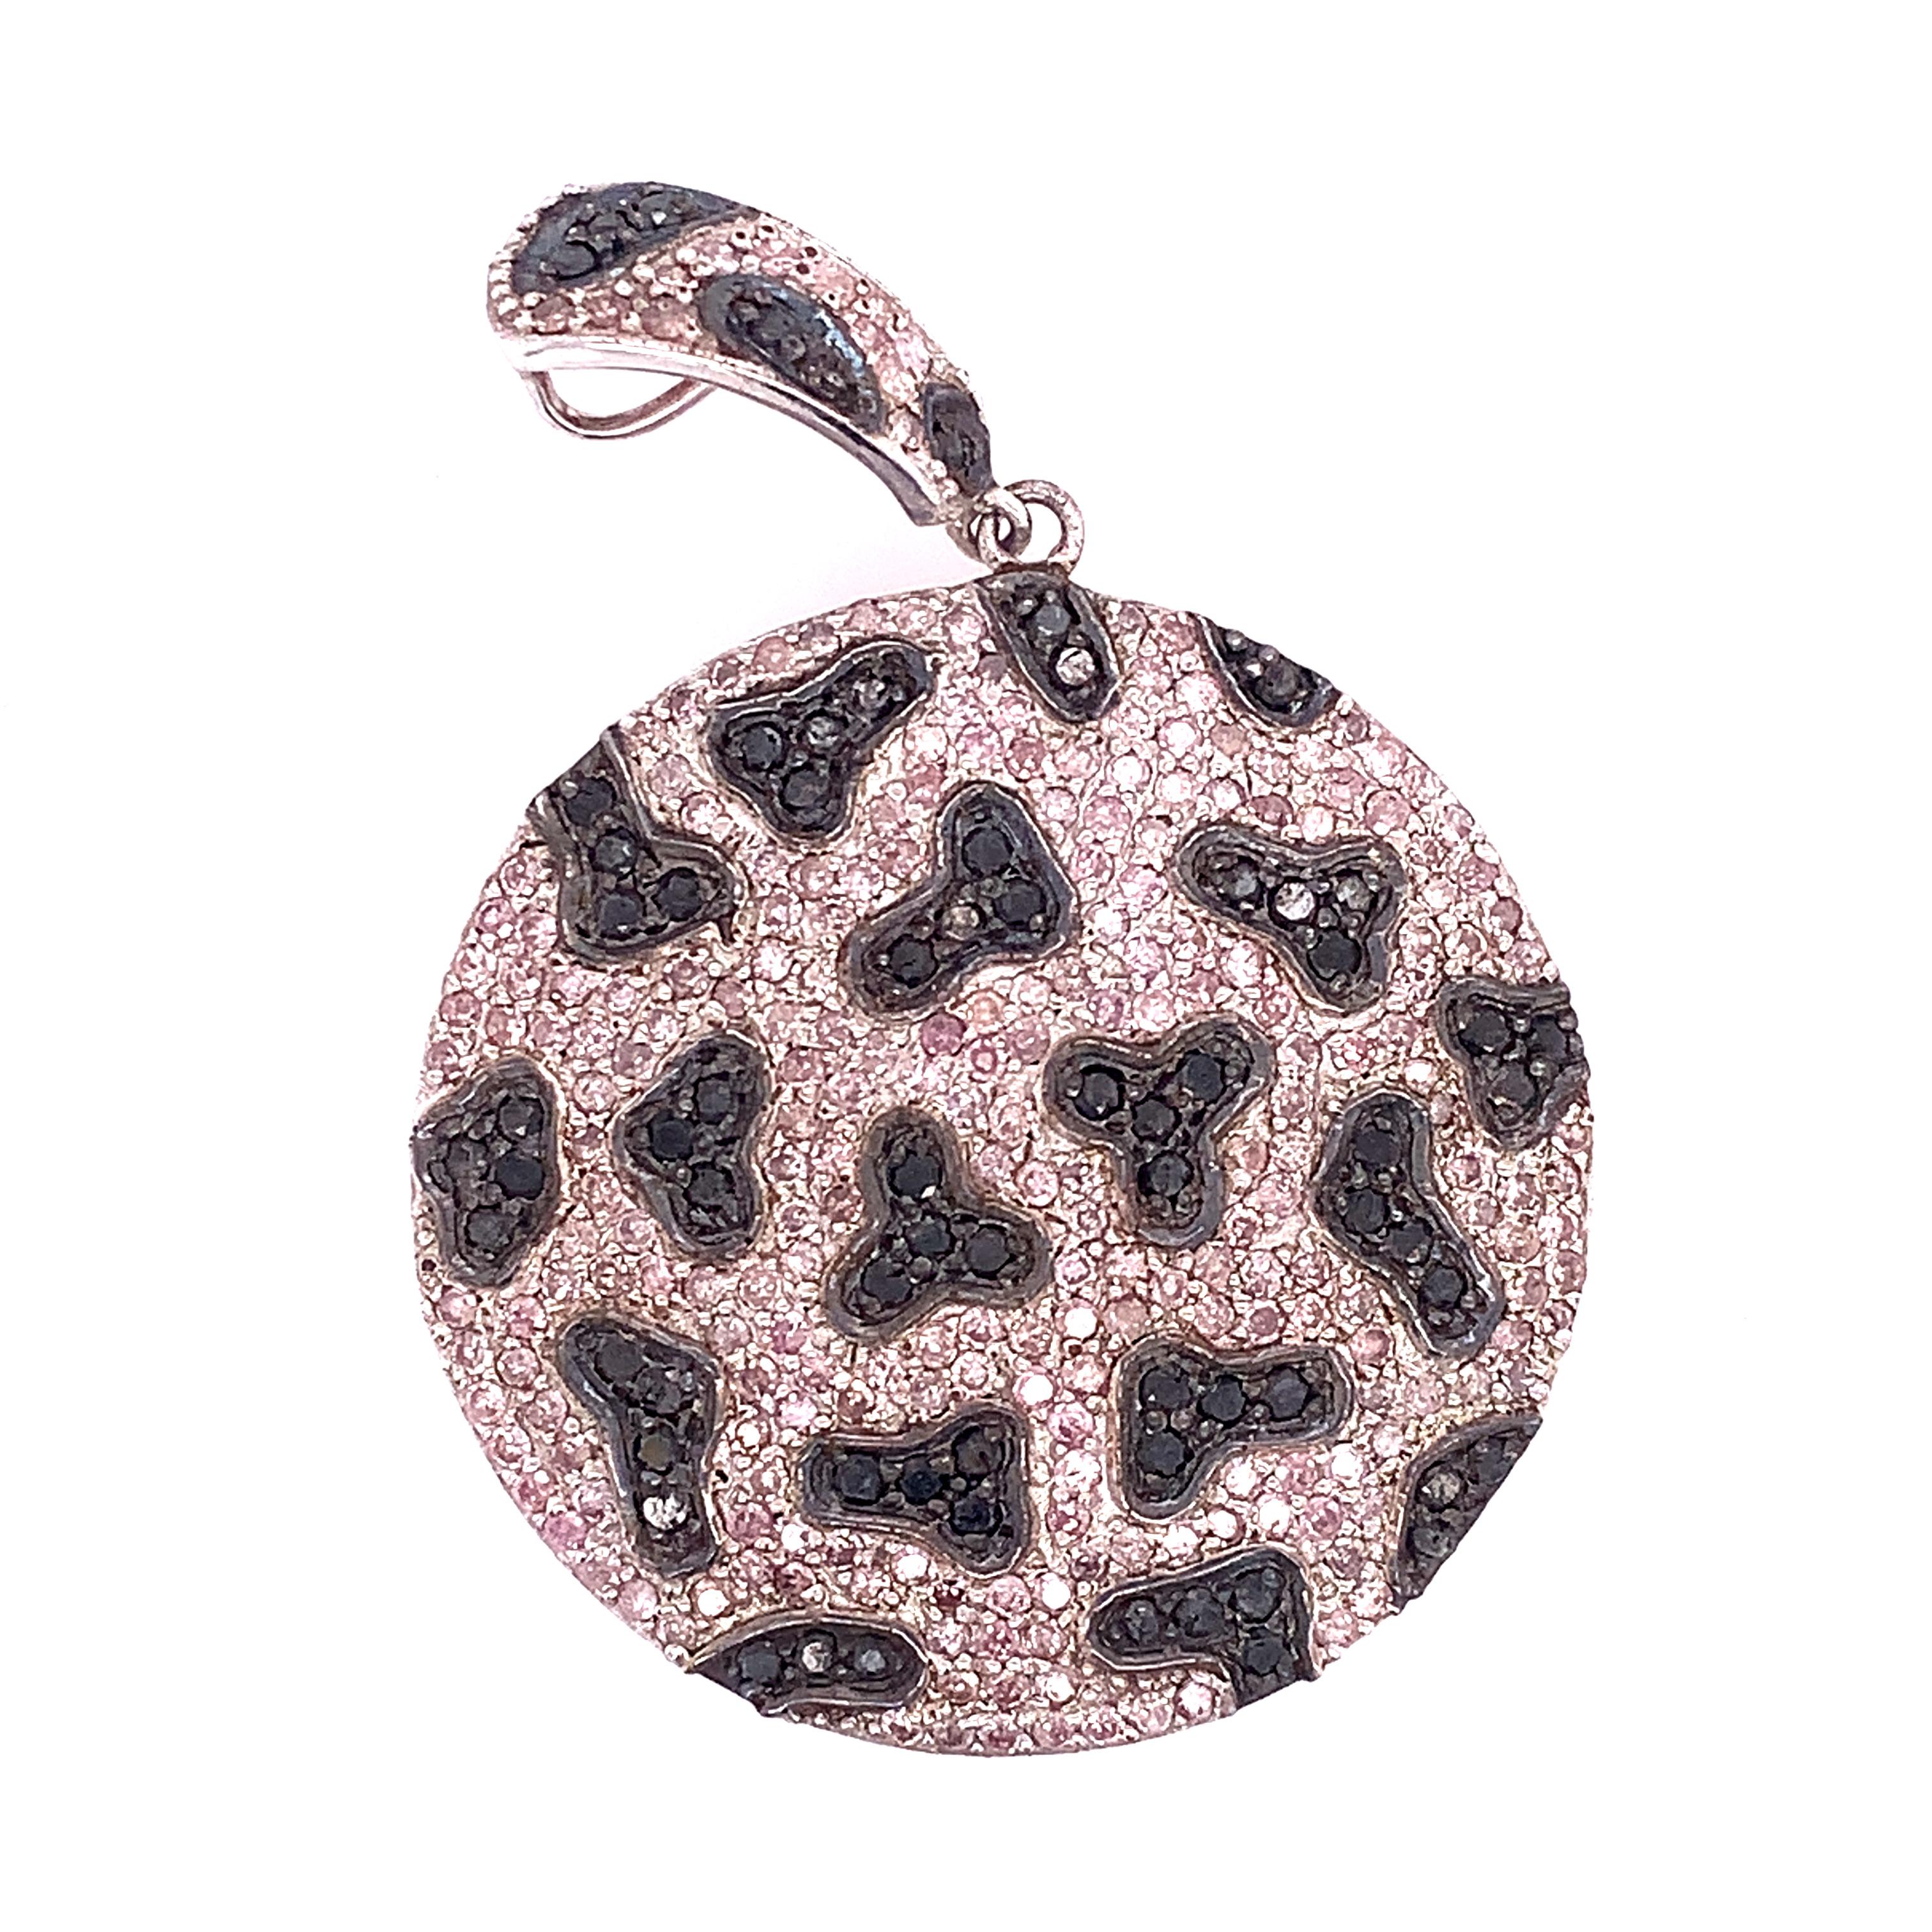 Life in color collection

Black & White icy diamonds are set in circle disc silver plate.

Black Diamond : 1.35ct total weight.
Diamond : 2.86ct total weight.